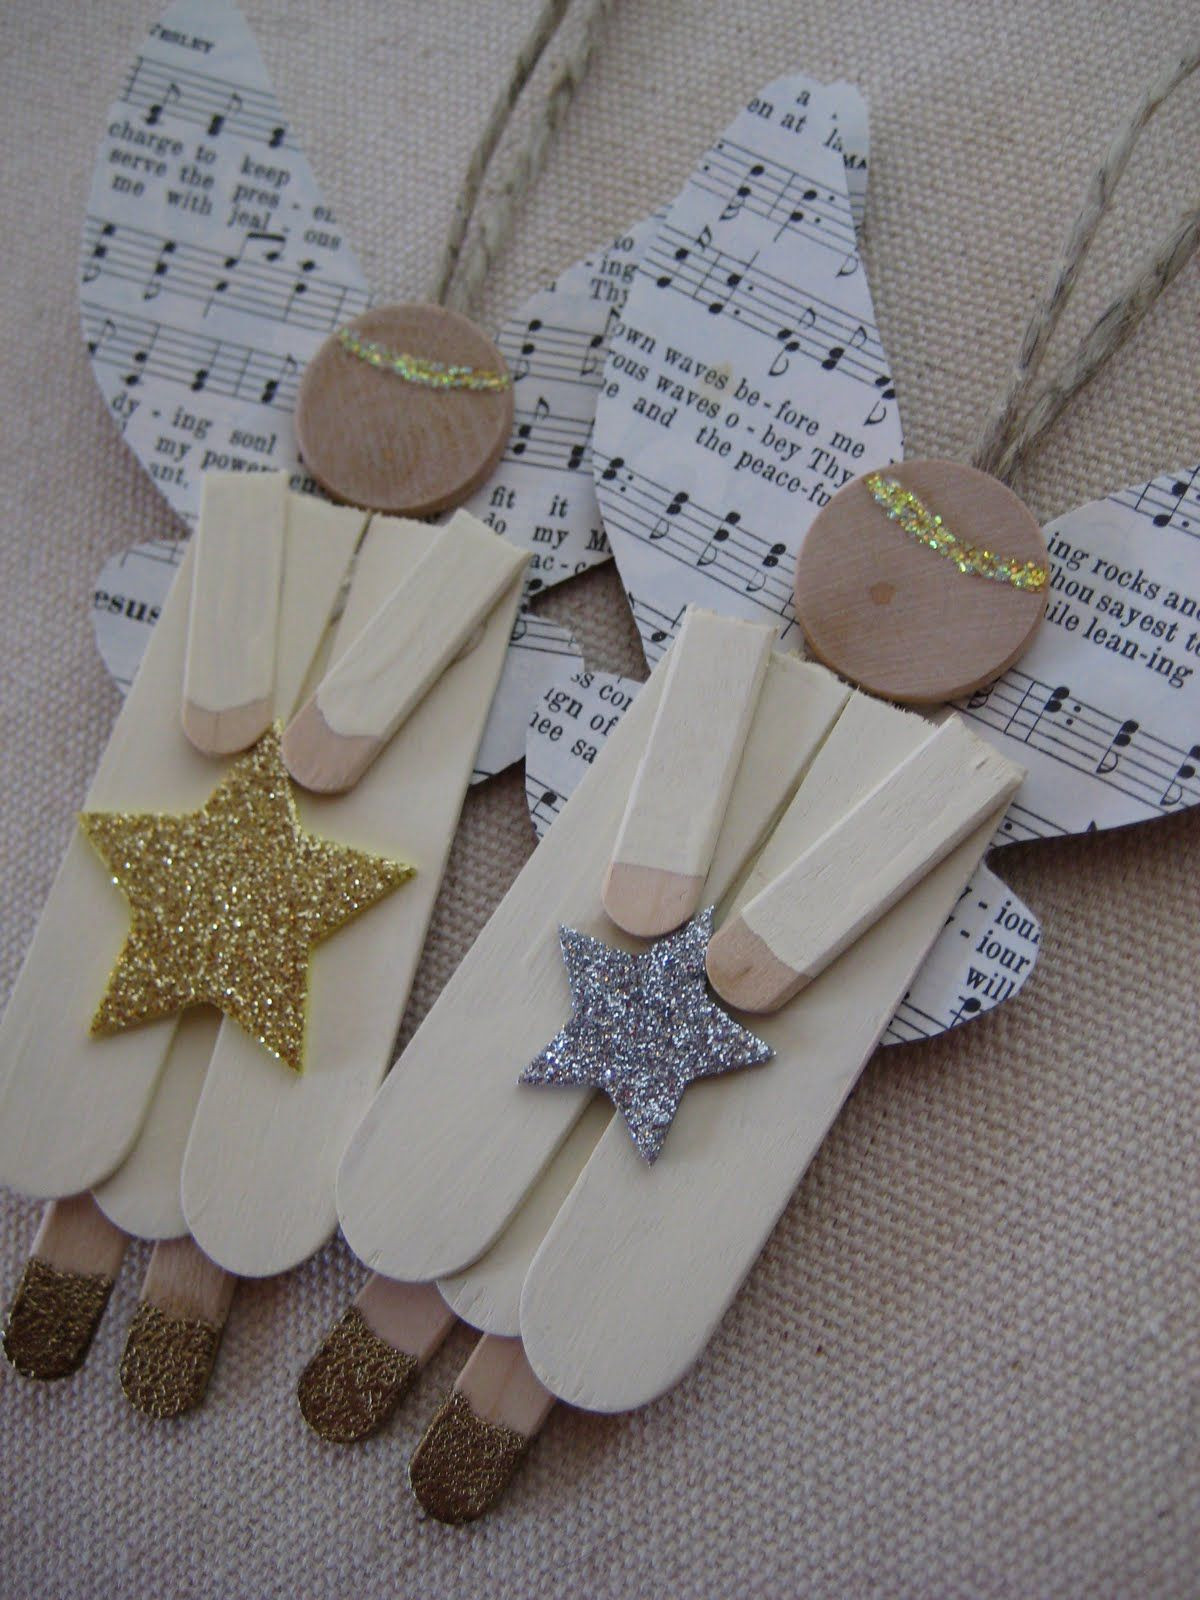 DIY Christmas Ornaments With Popsicle Sticks
 Popsicle Stick Crafts Reveal The Versatility Everyday Items